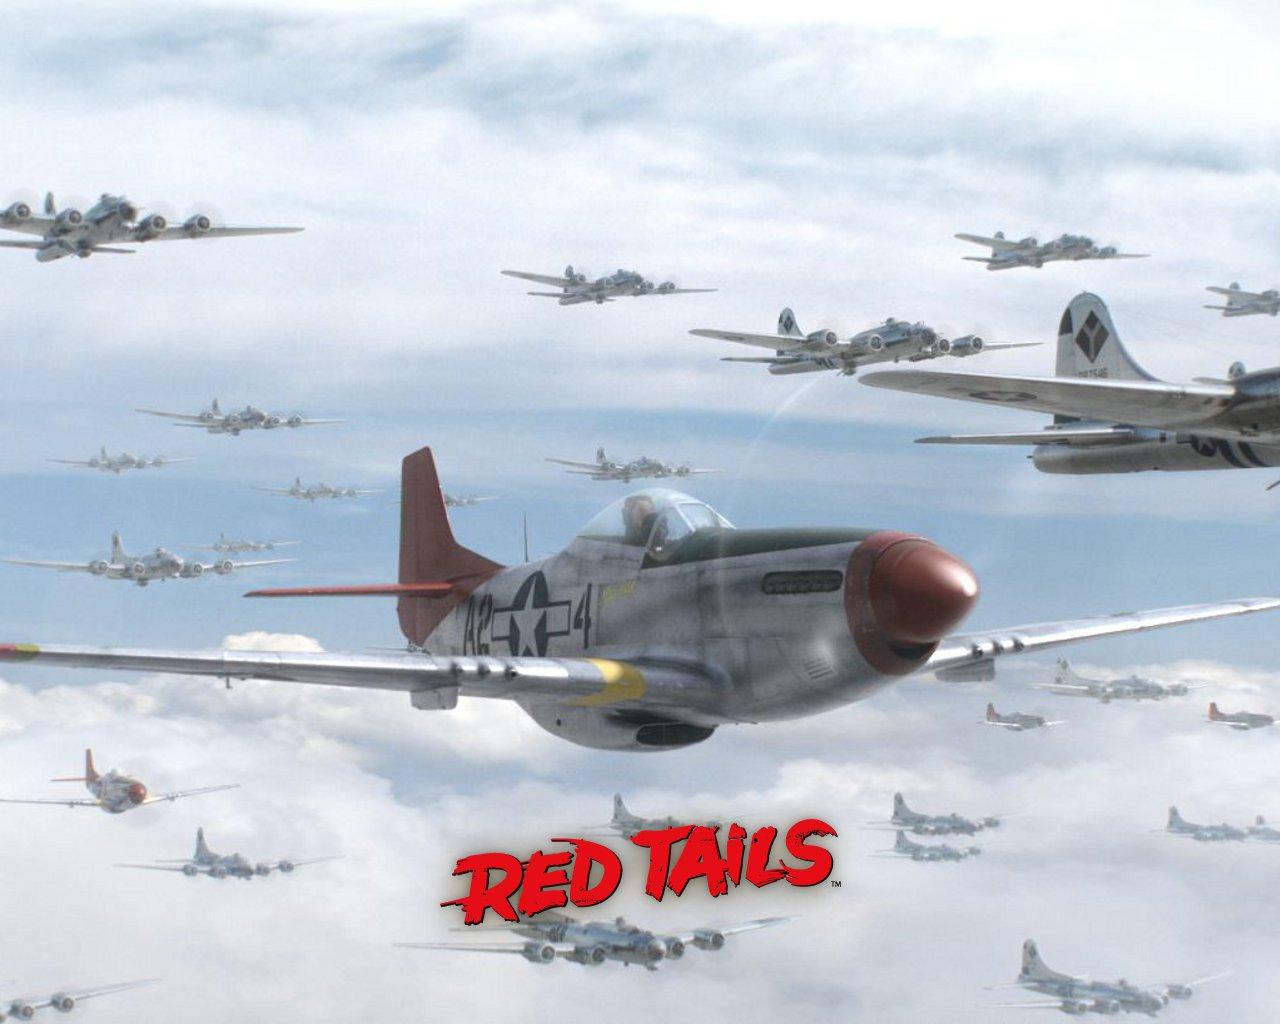 trololo blogg: Wallpaper Red Tails